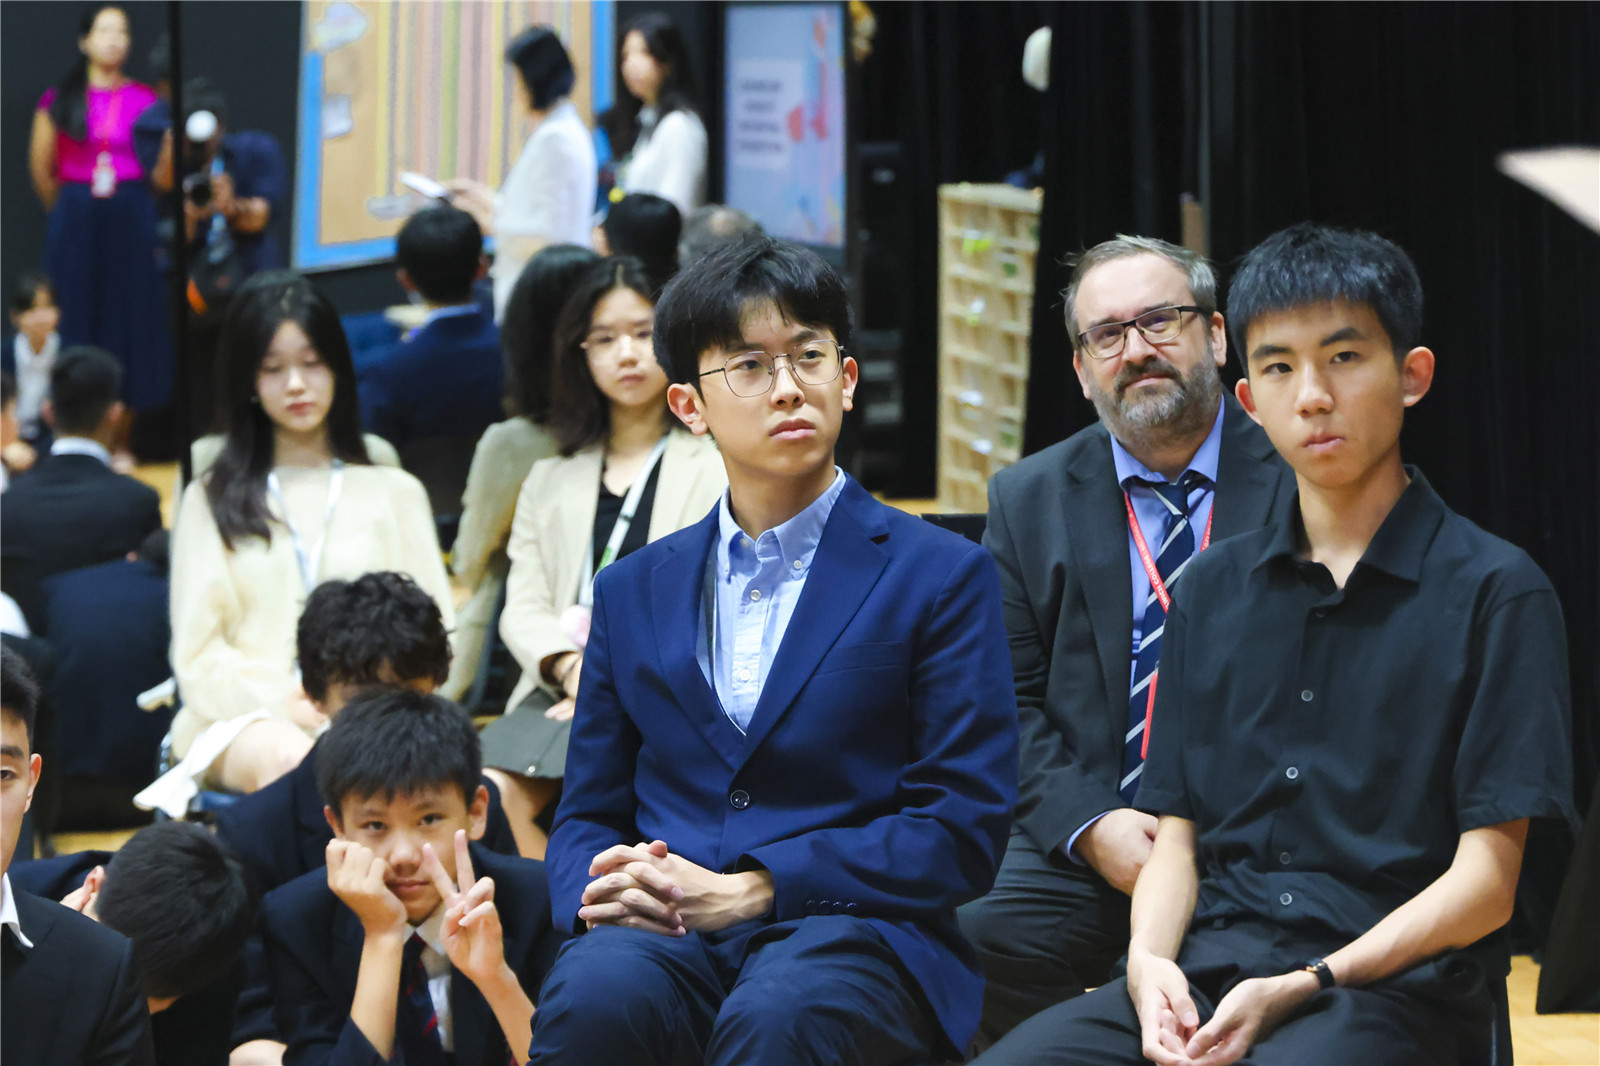 Mr Roger Smith with Senior School students